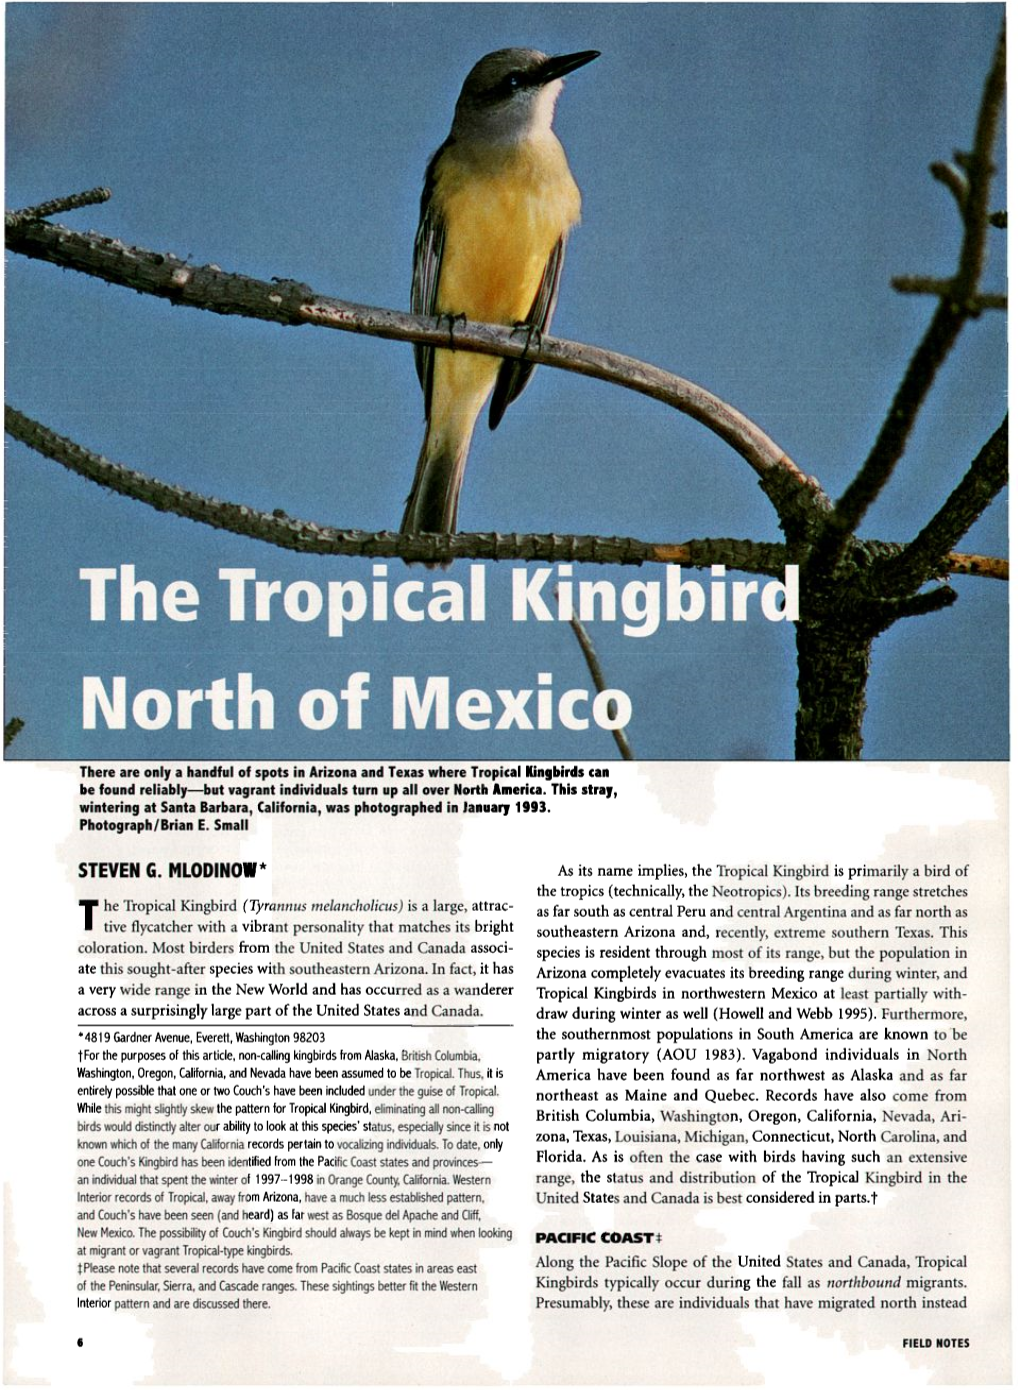 The Tropical Kingbird North of Mexico